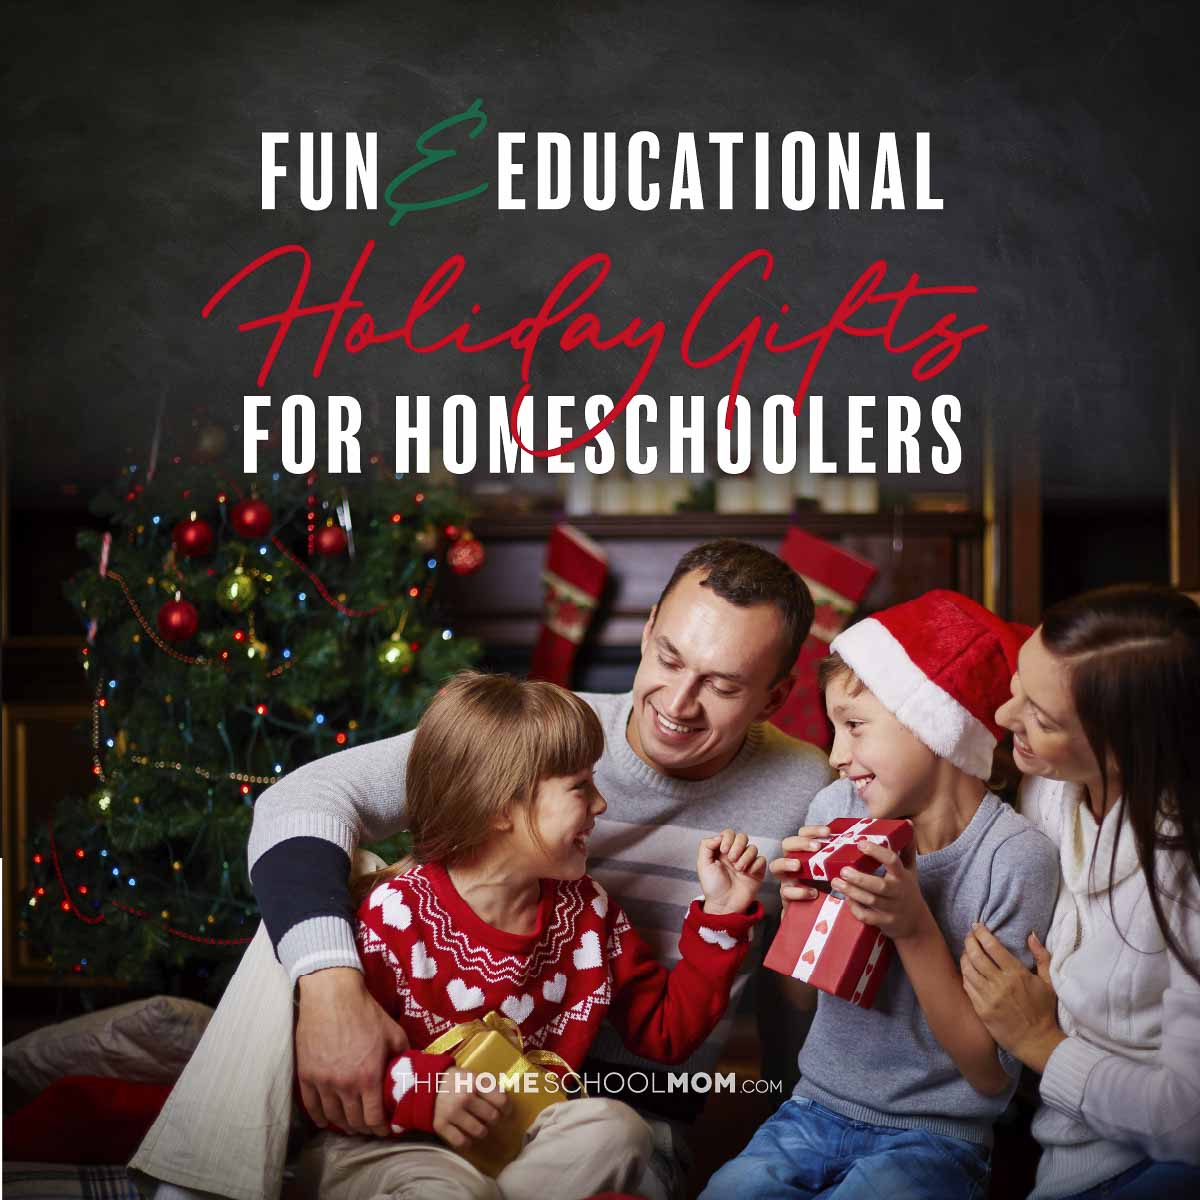 Fun & educational holiday gifts for homeschoolers.